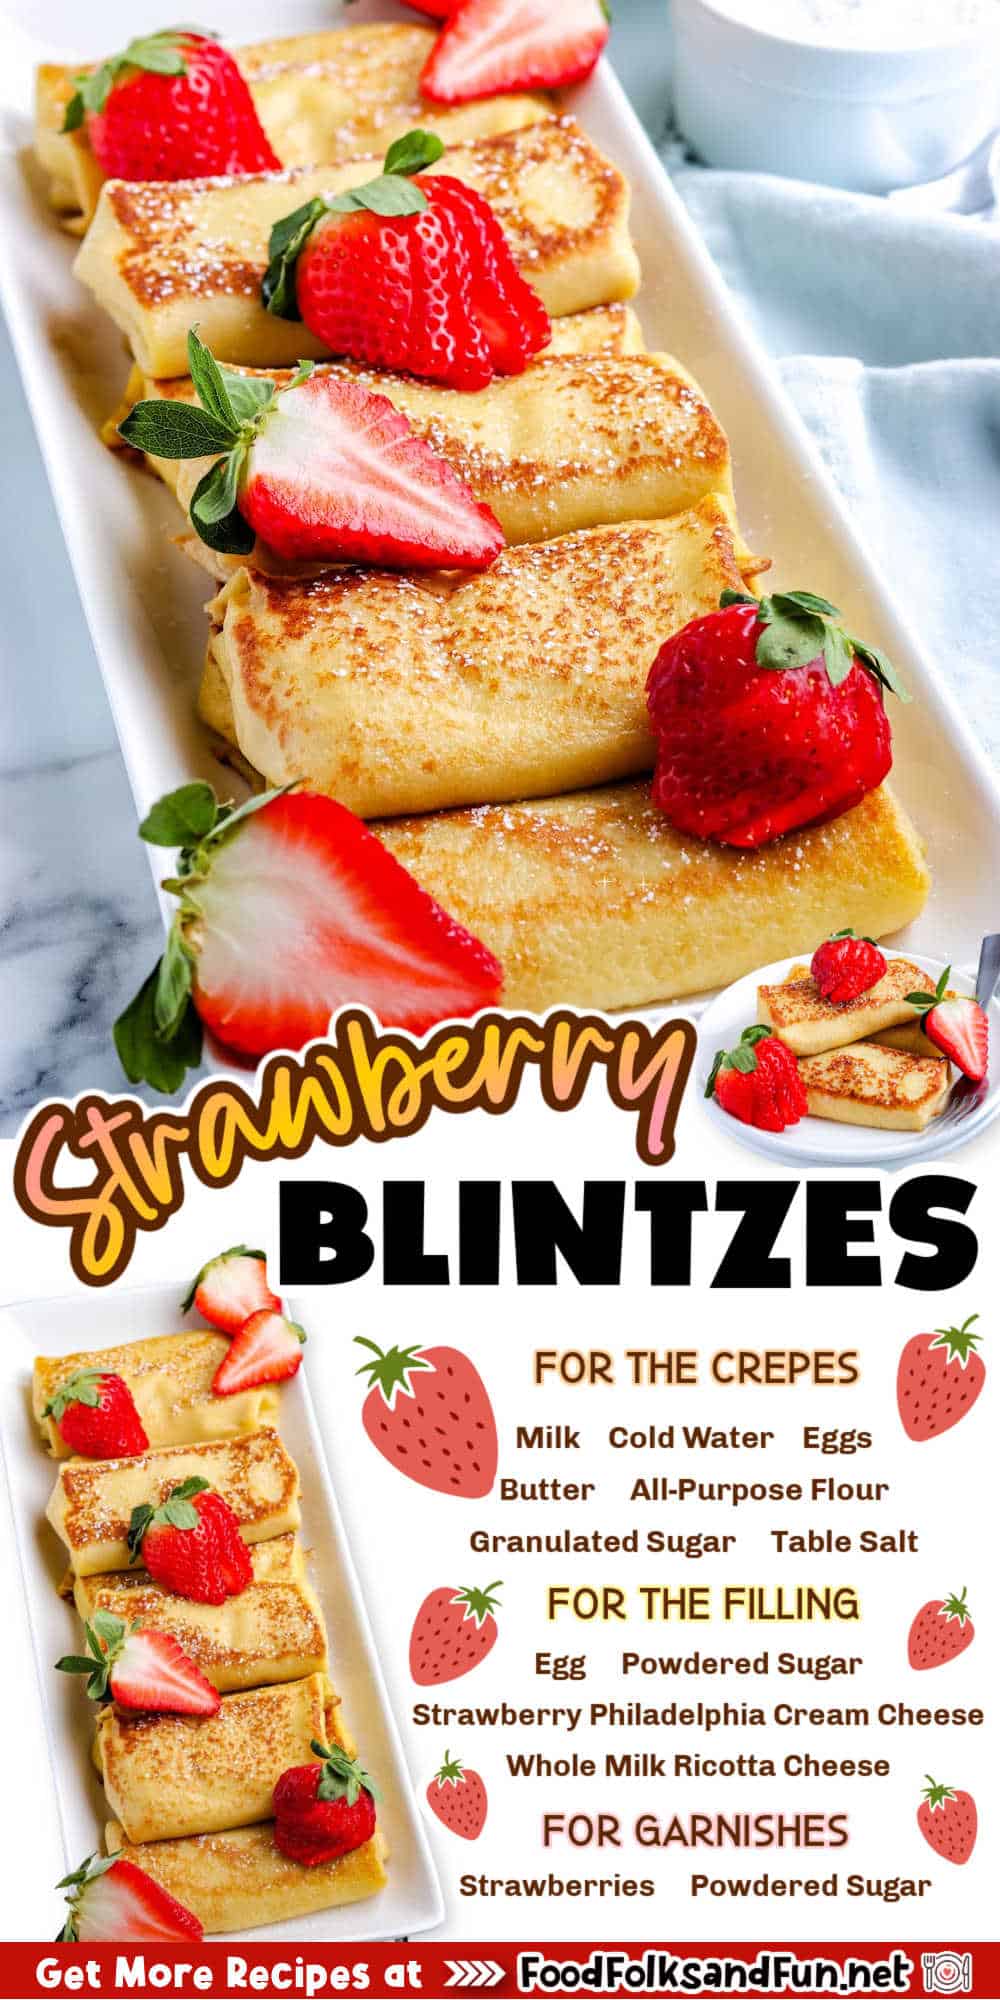 These strawberries and cream blintzes are perfect for breakfast or a quick sweet snack. You’ll love this recipe if the idea of crepes stuffed with a strawberry cream cheese filling, pan-fried, and dusted with powdered sugar sounds good.
 via @foodfolksandfun